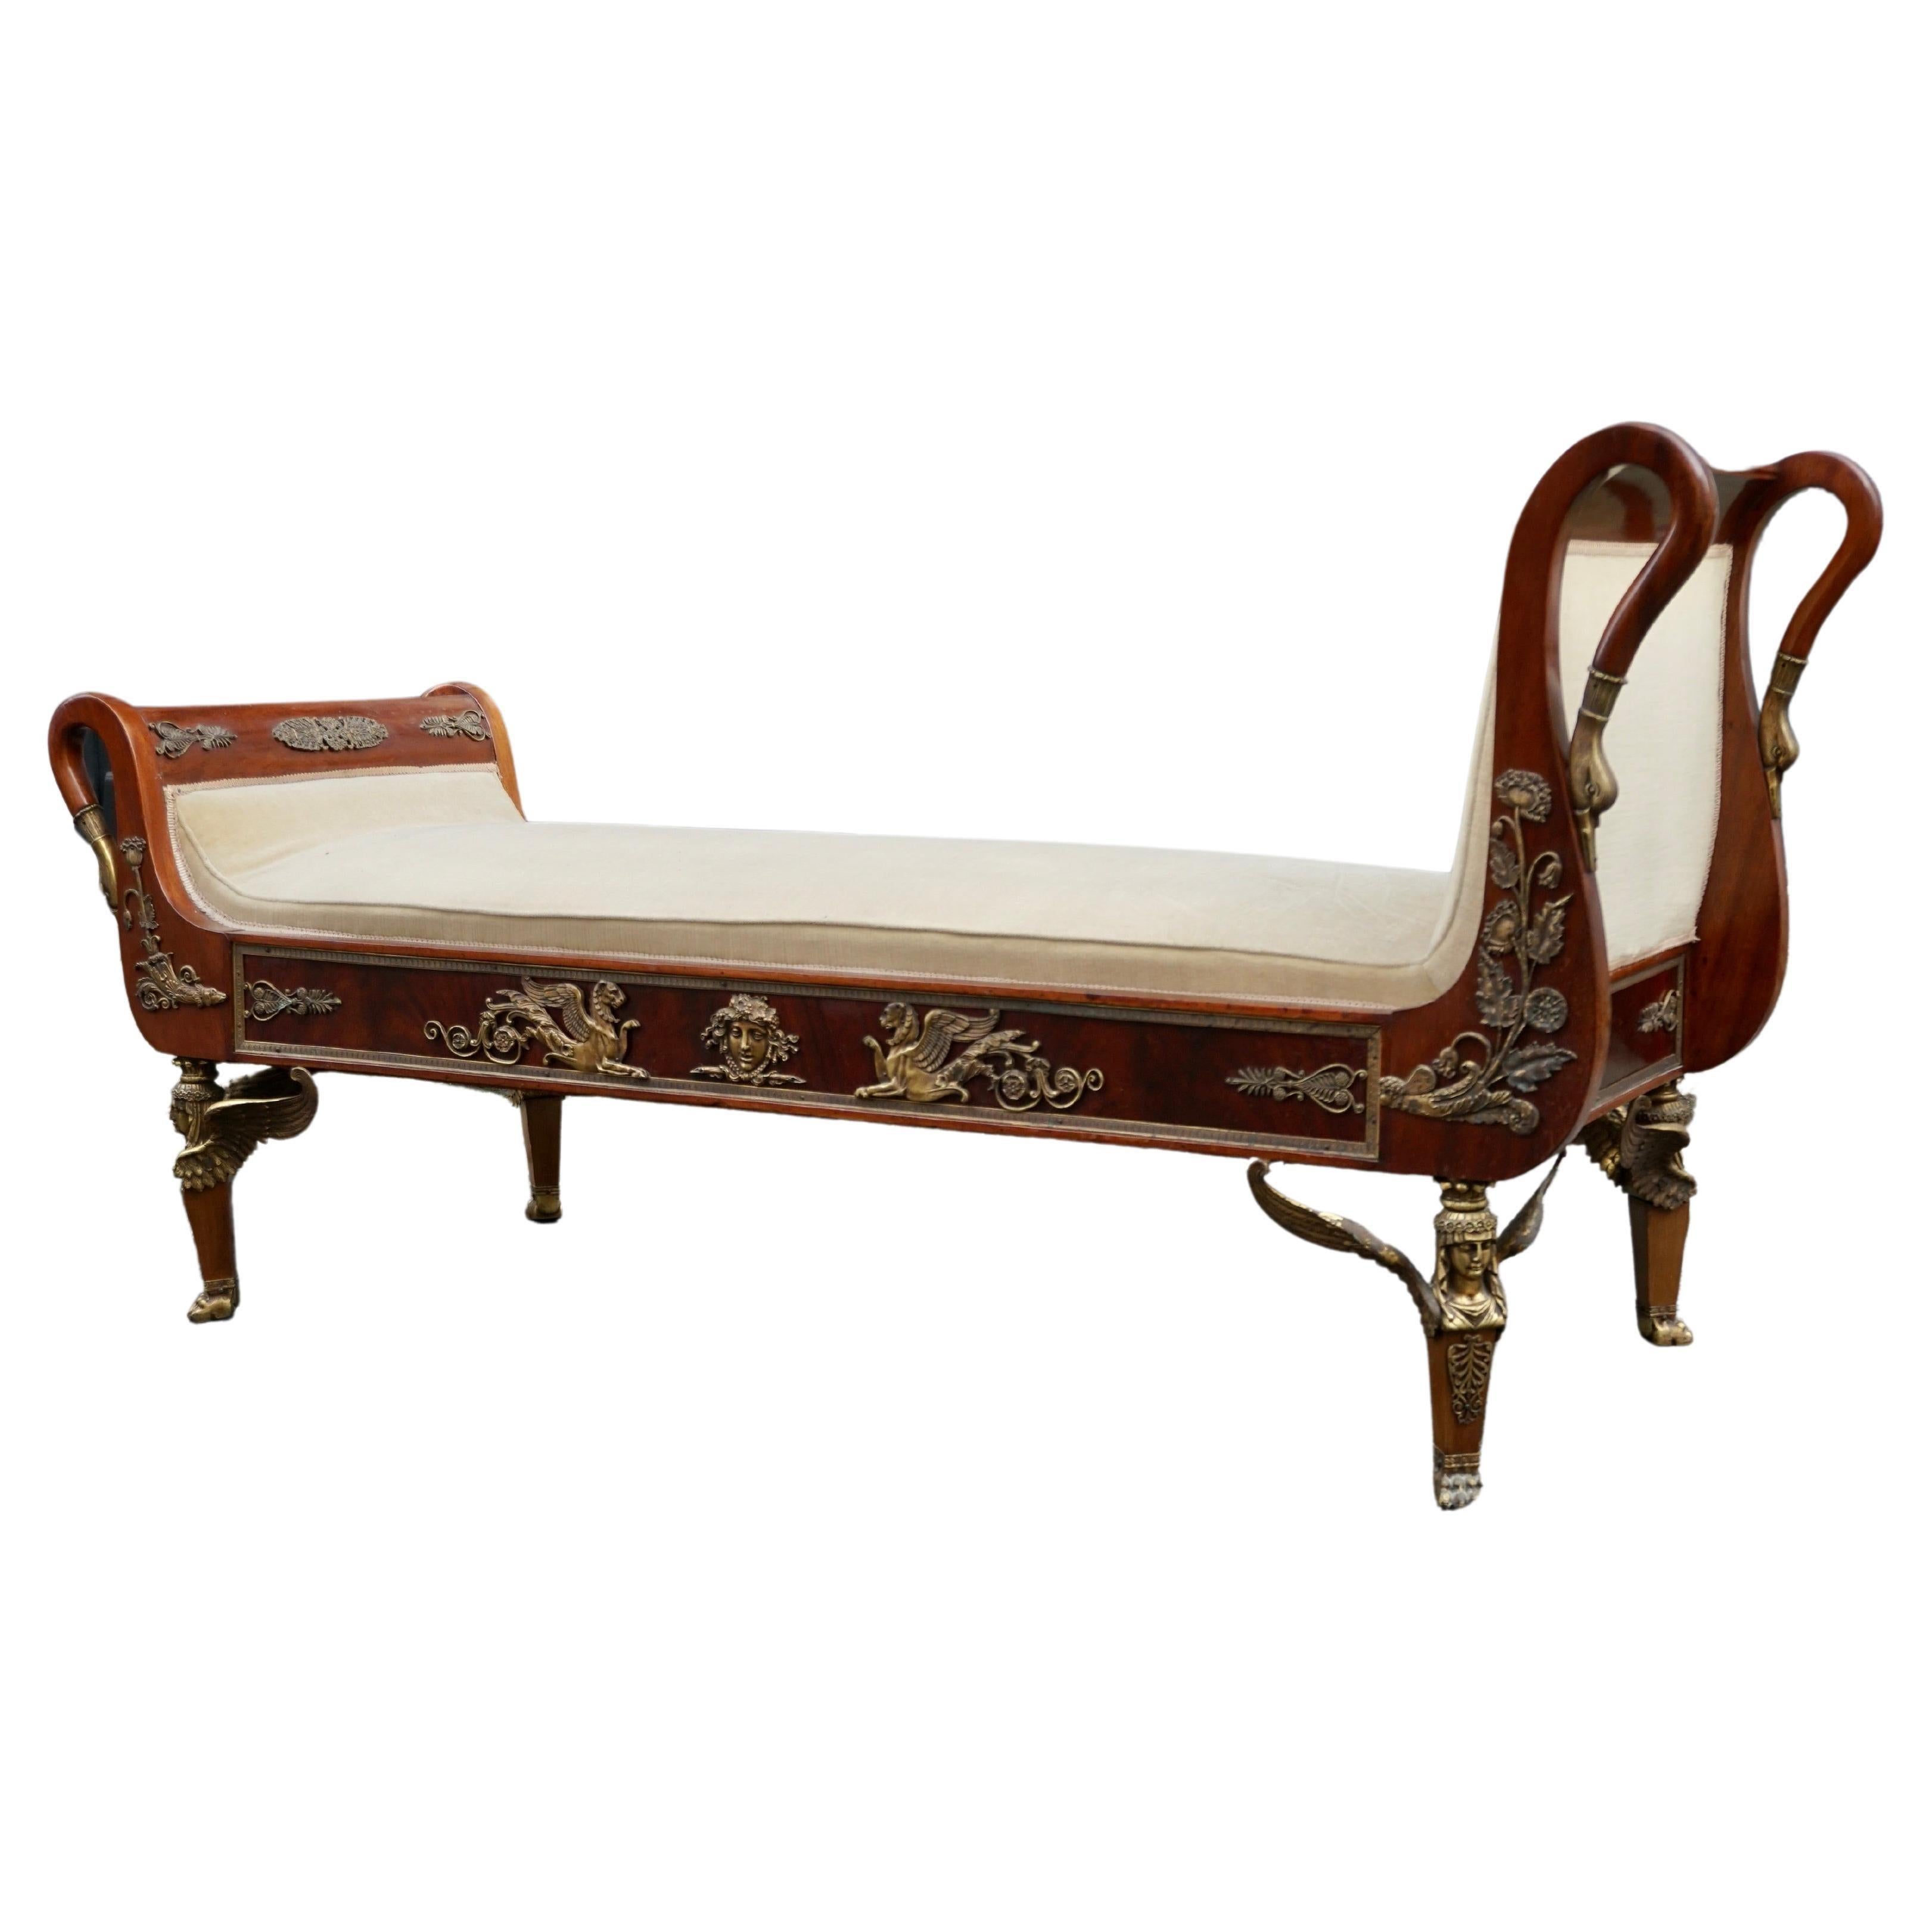 Empire Revival Incredible Gilt Bronze-Mounted Swan Neck Daybed in French Empire Style For Sale